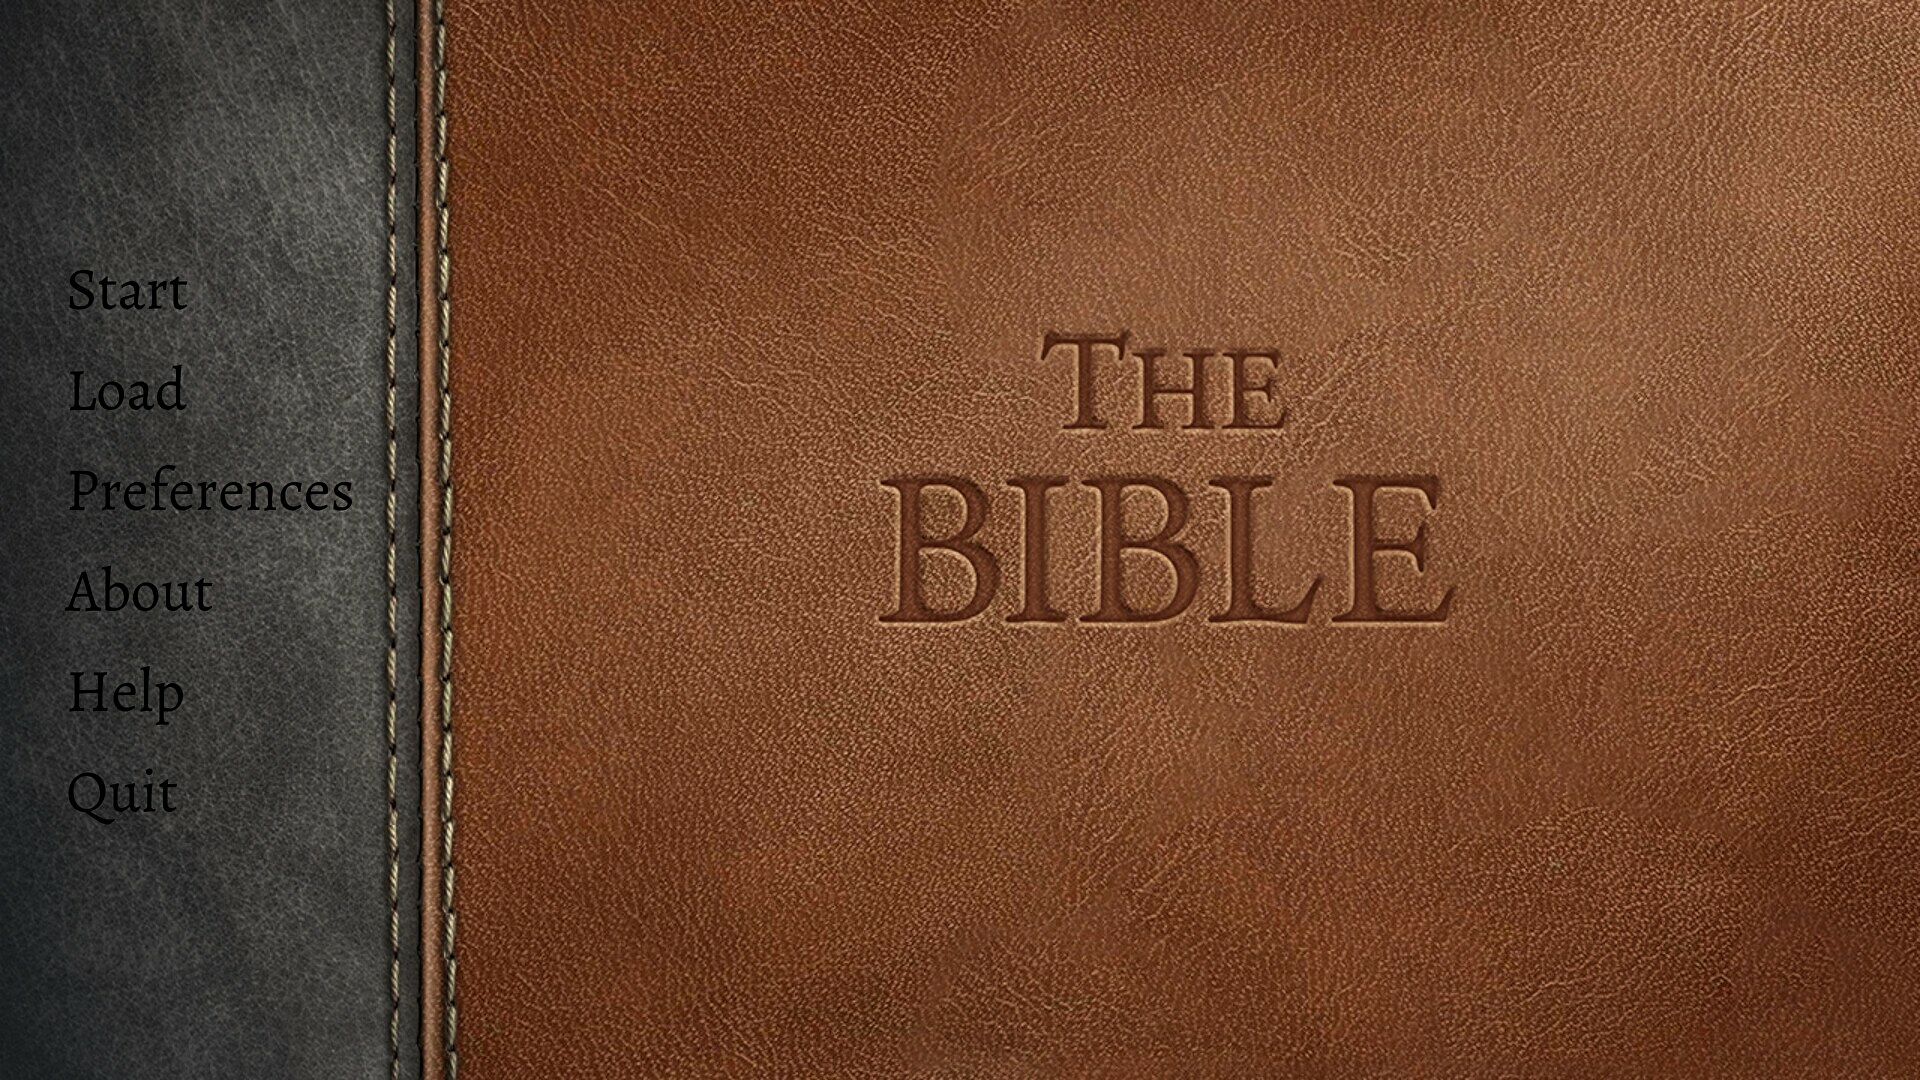 Someone’s putting The Bible on Steam, and they’re adding achievements